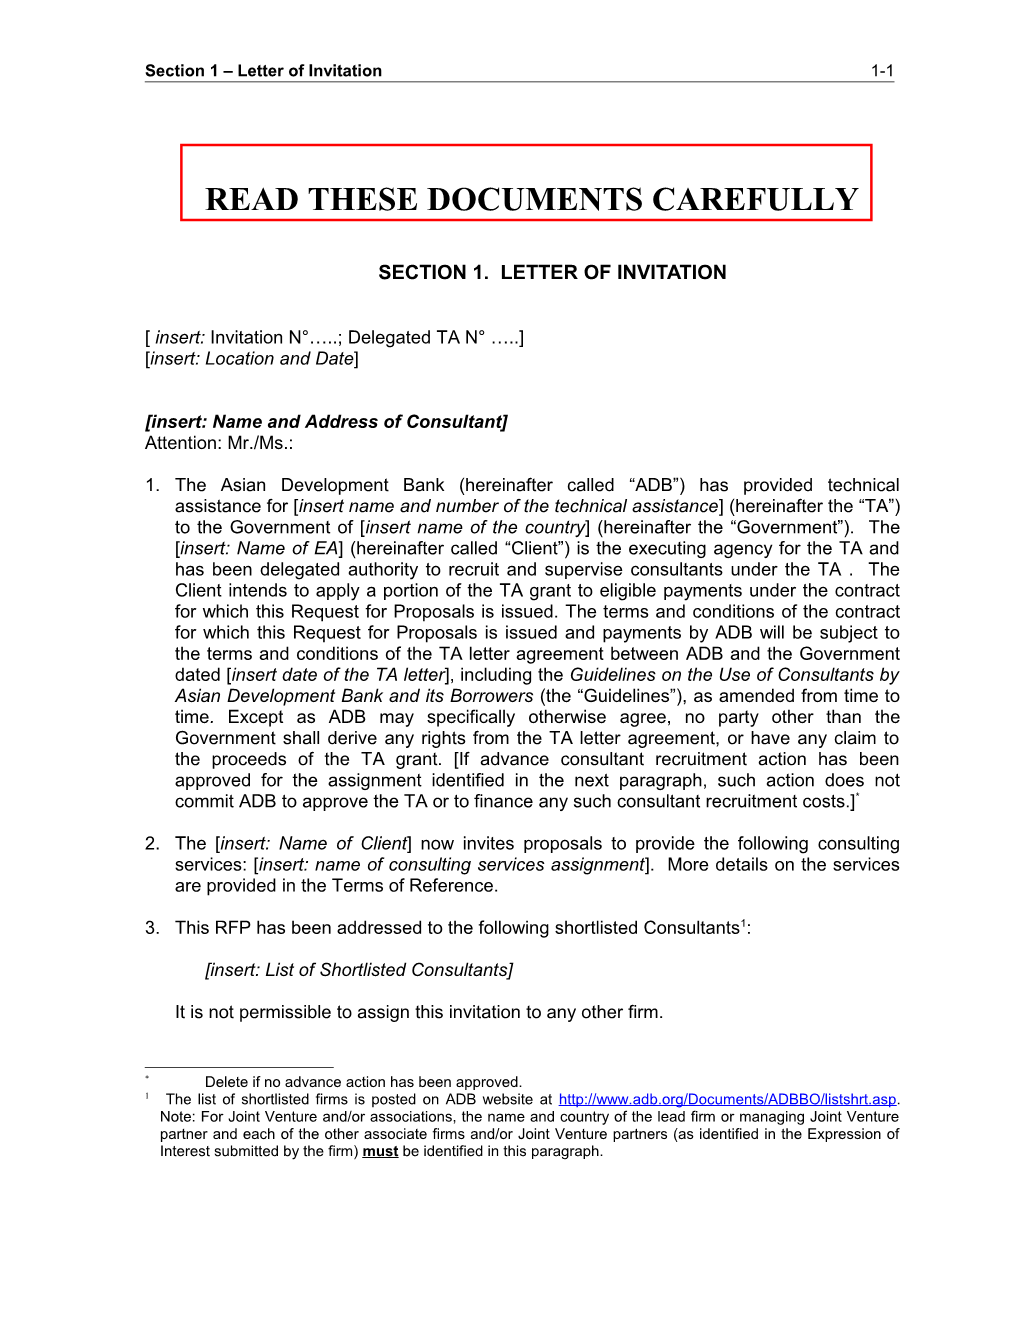 Read These Documents Carefully